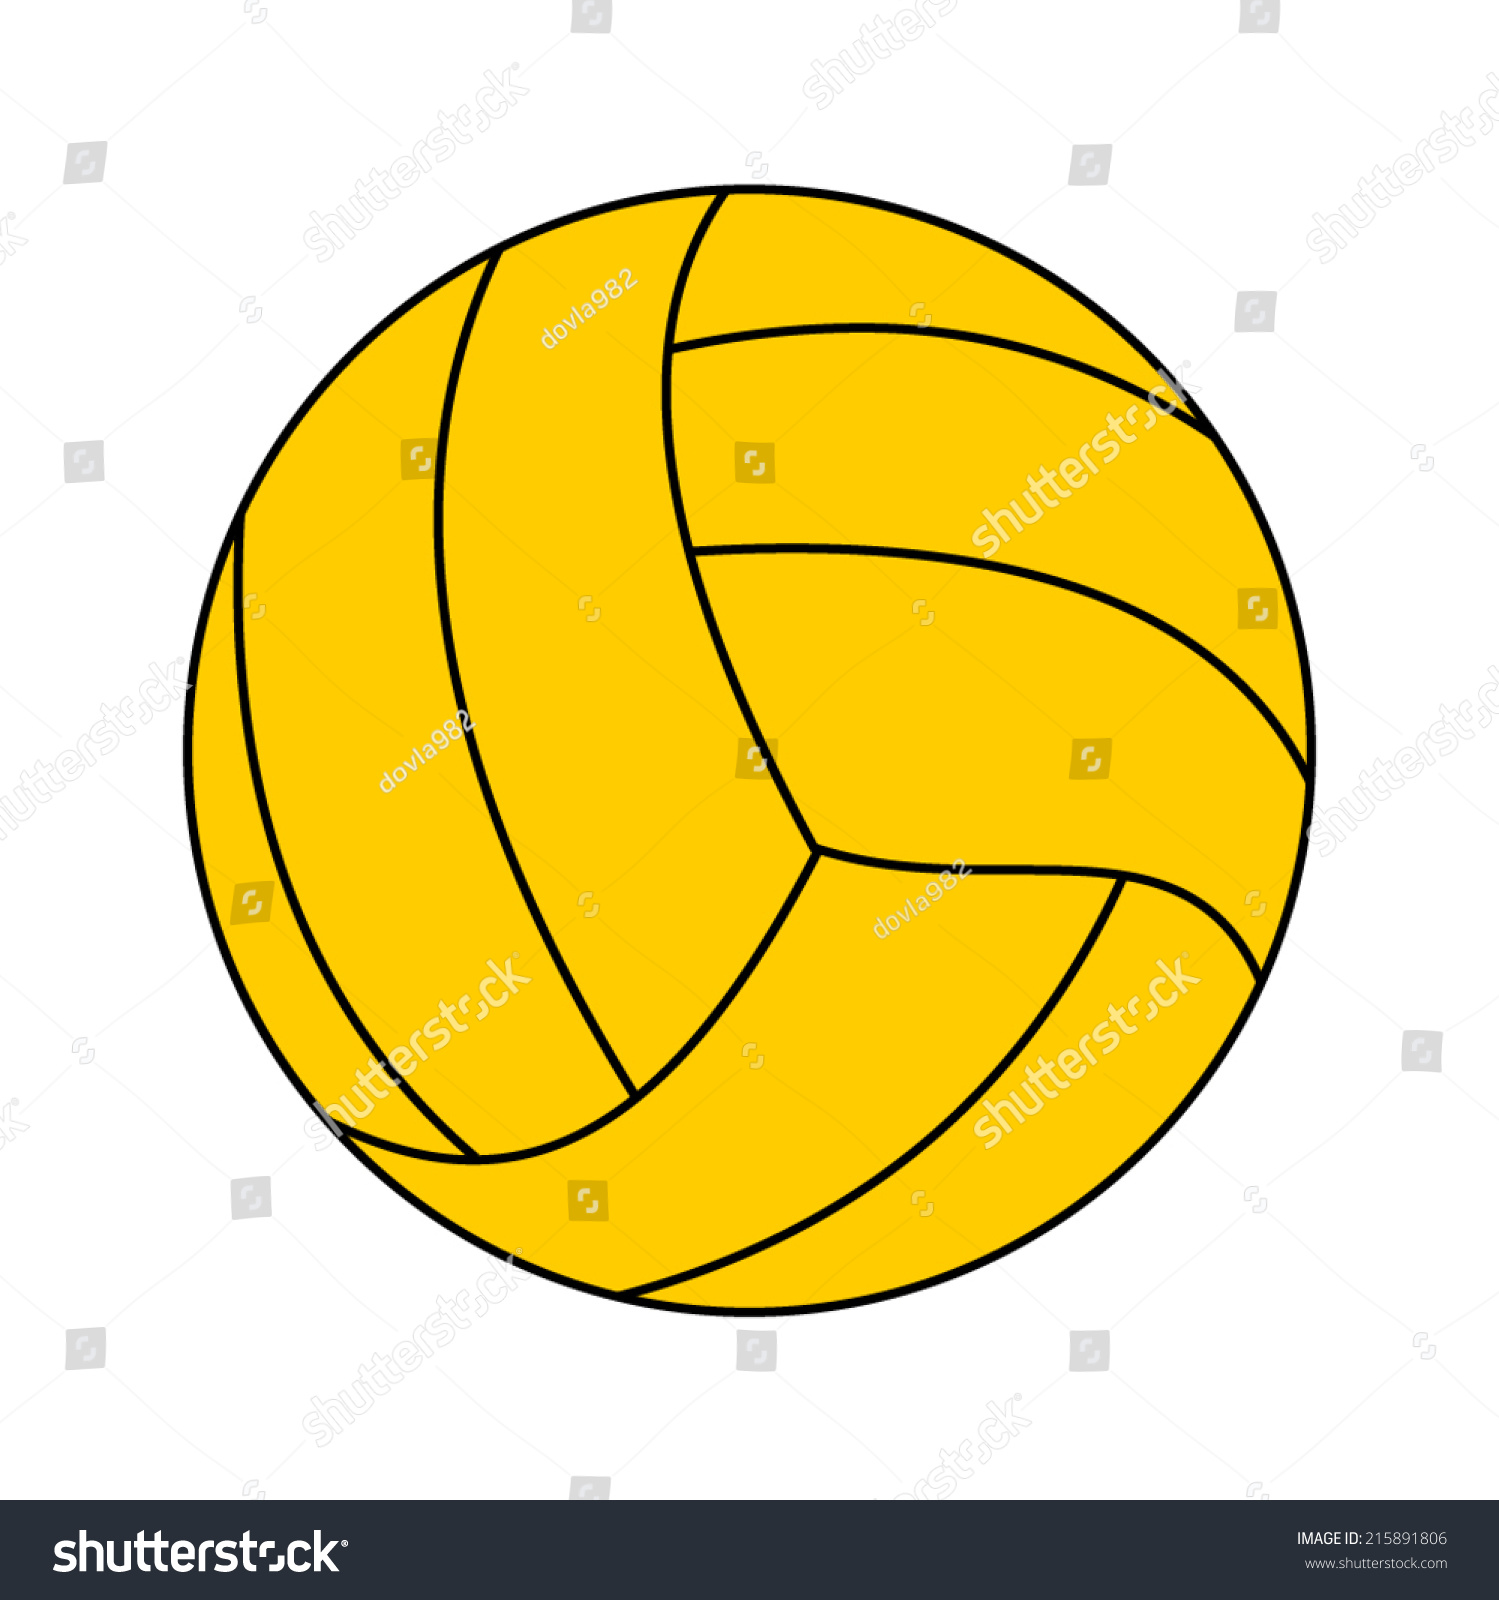 Stock Vector Vector Illustration Of Water Polo Ball Isolated On White Background 215891806 